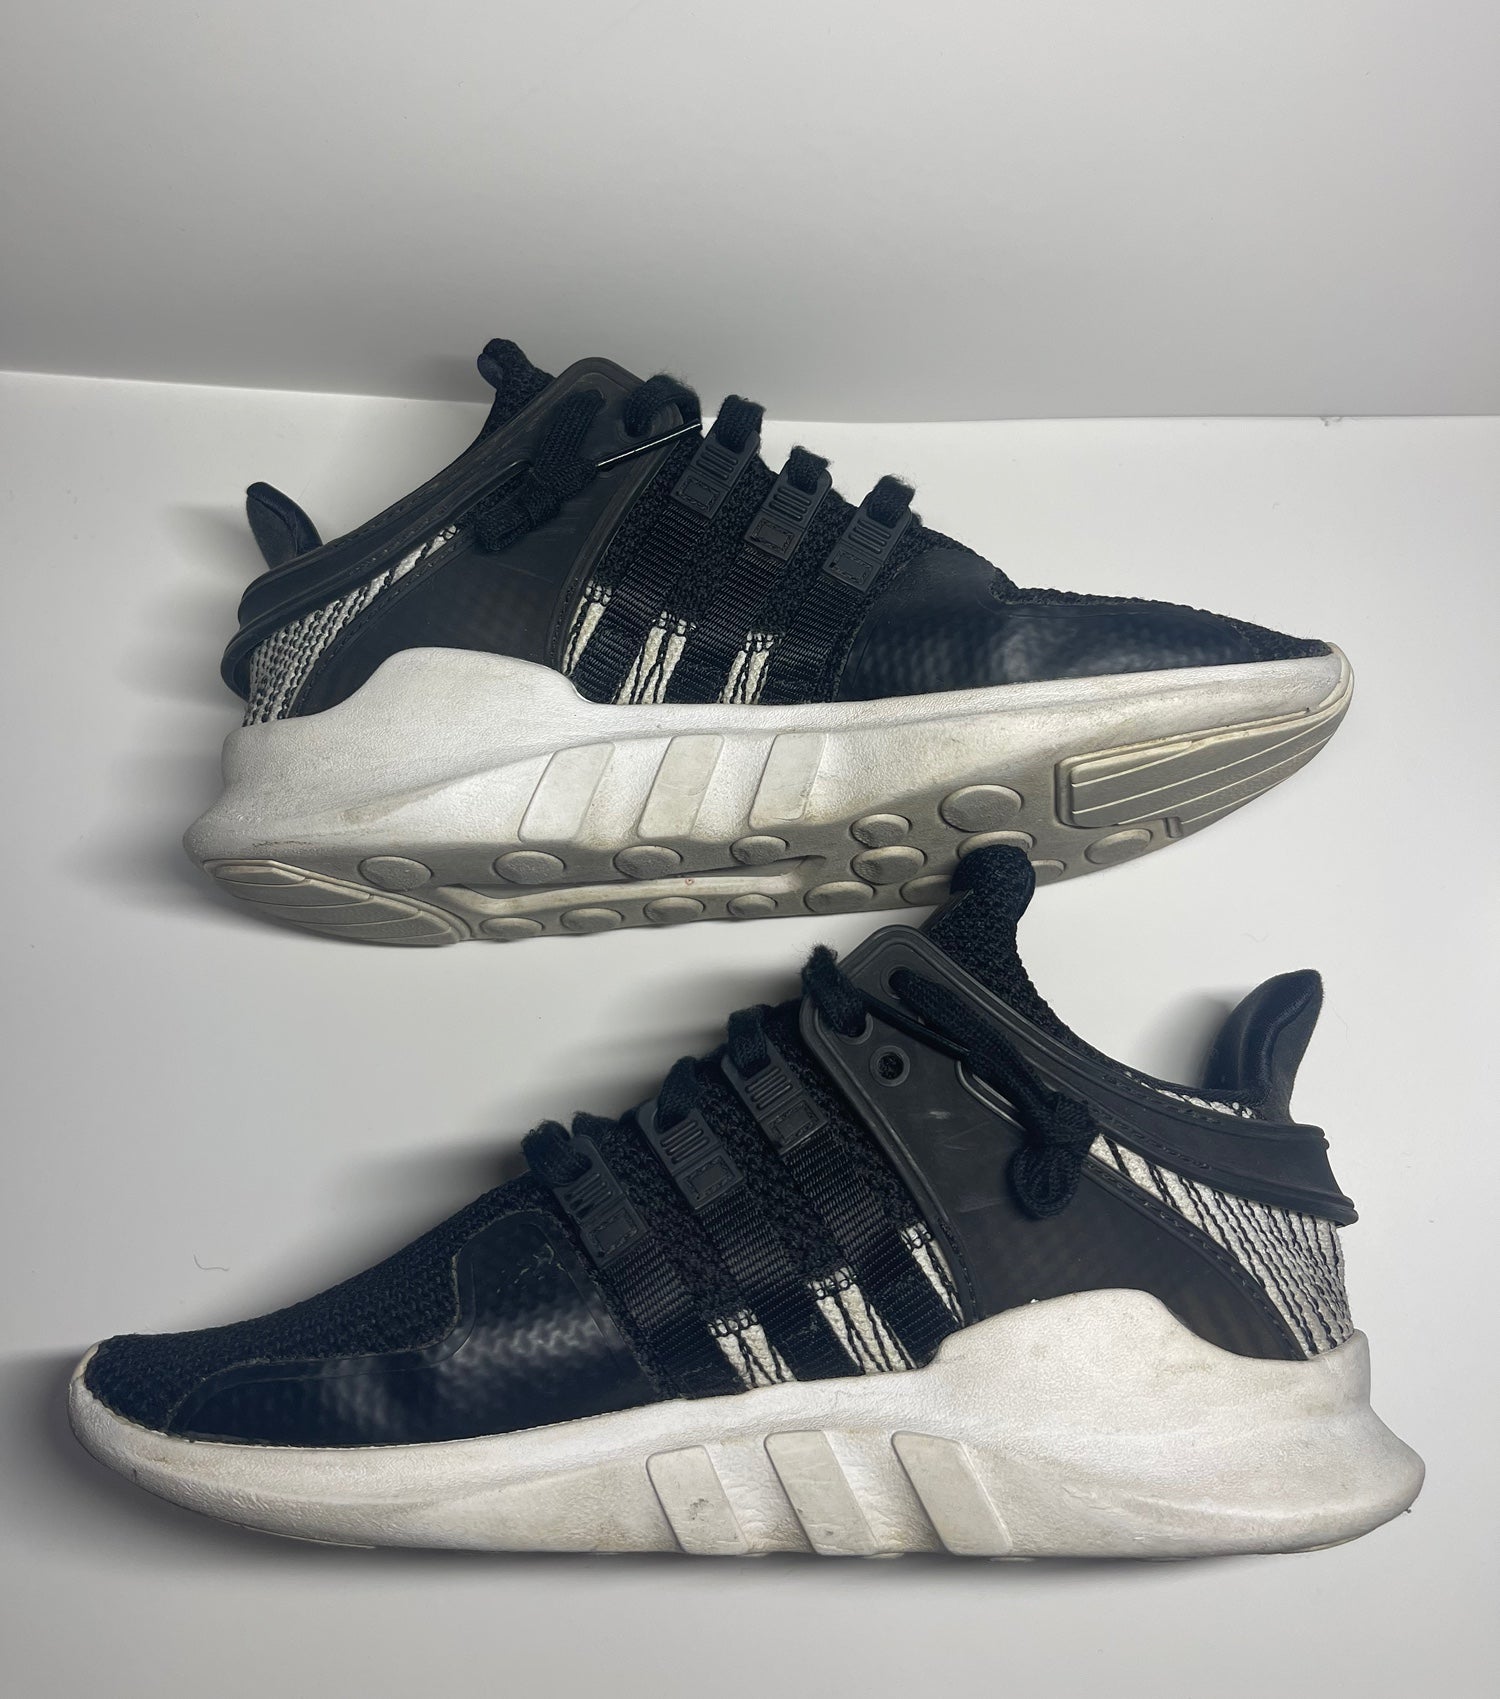 Size 6. Black Adidas EQT support ADV 91/16 SidelineSwap